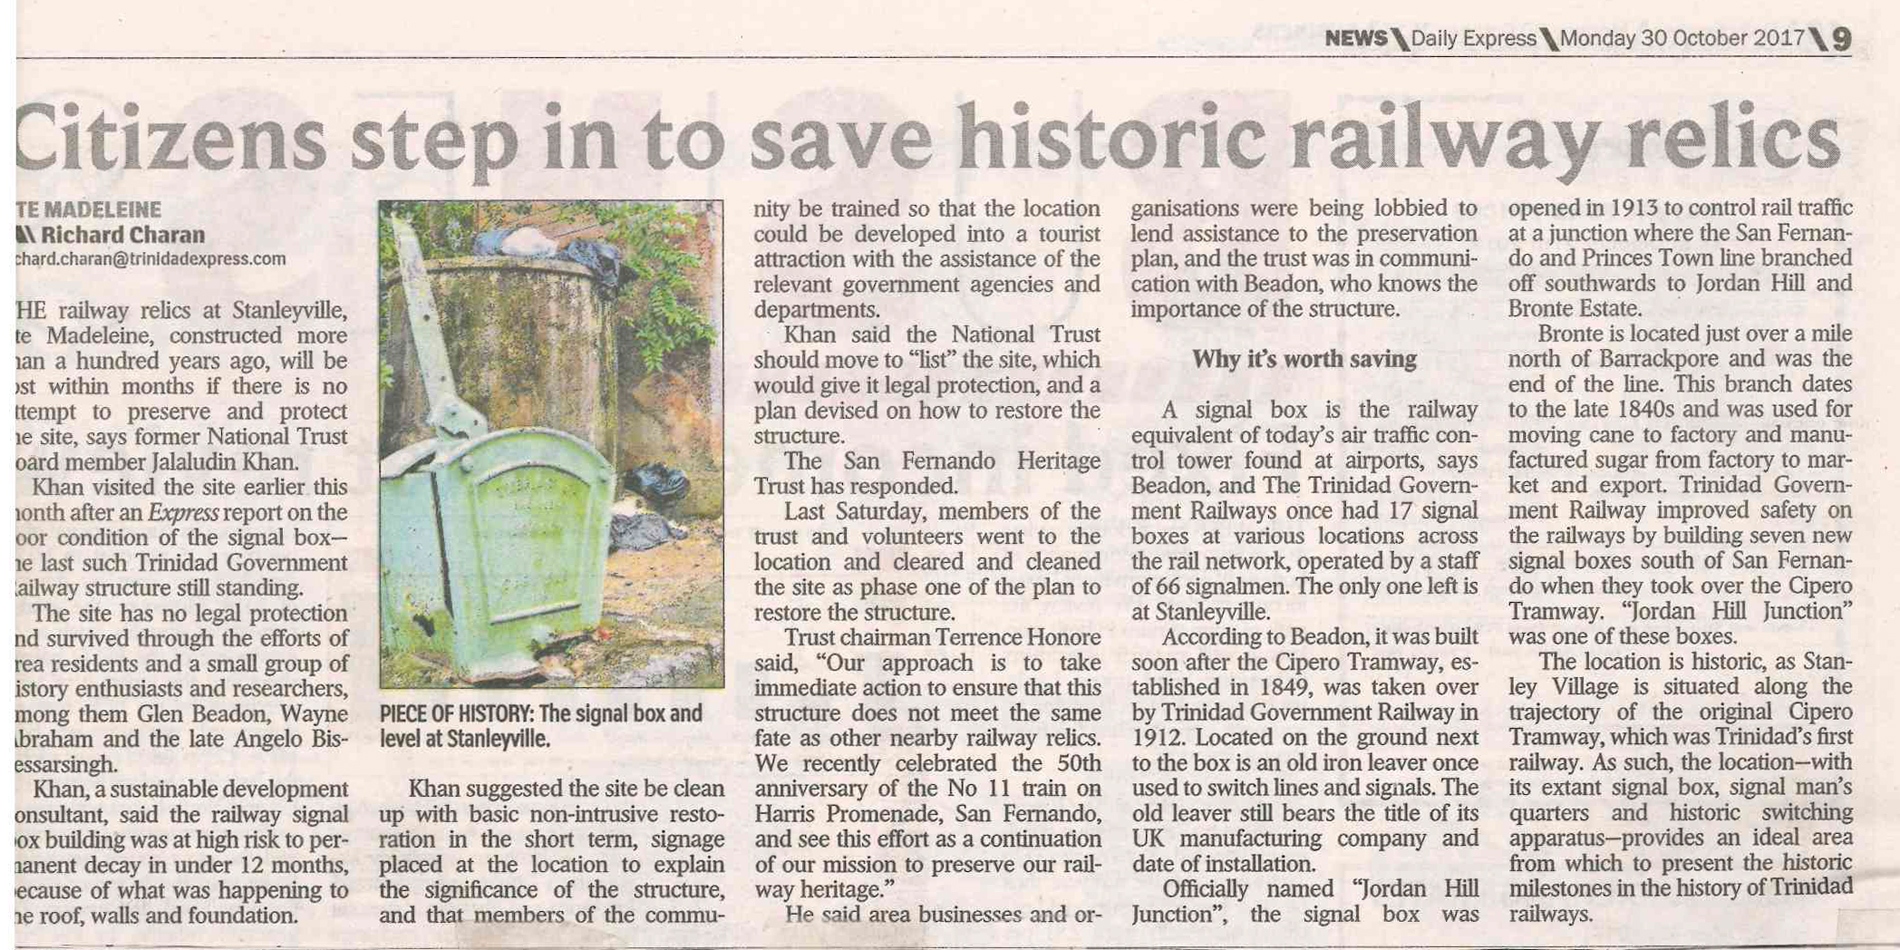 Citizens step in to save historic railway relics